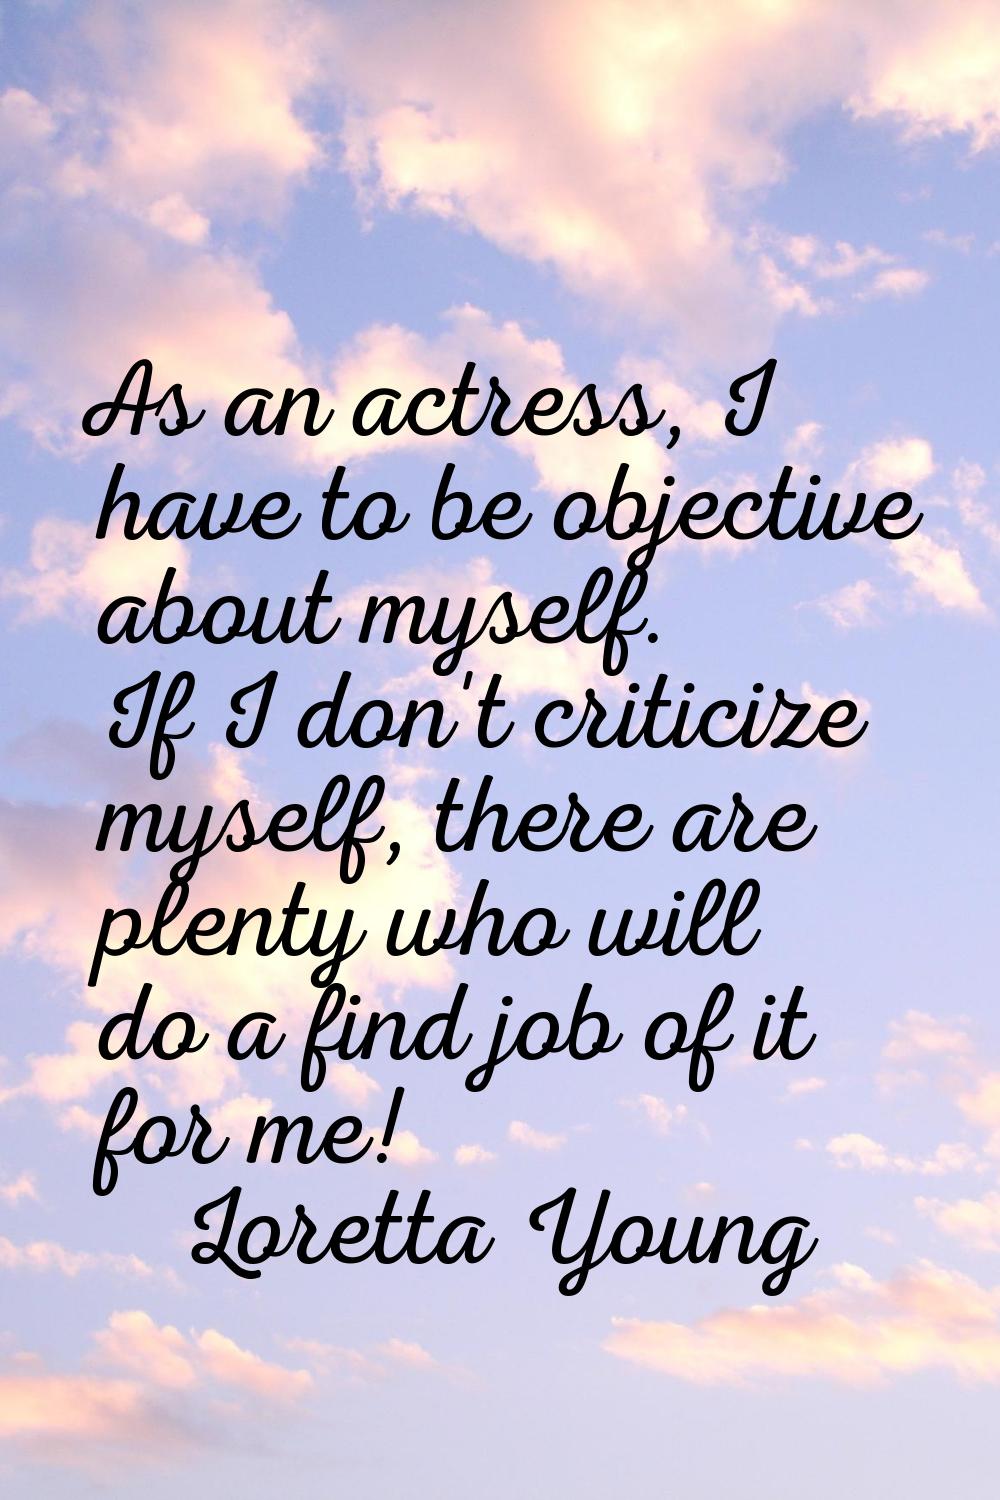 As an actress, I have to be objective about myself. If I don't criticize myself, there are plenty w